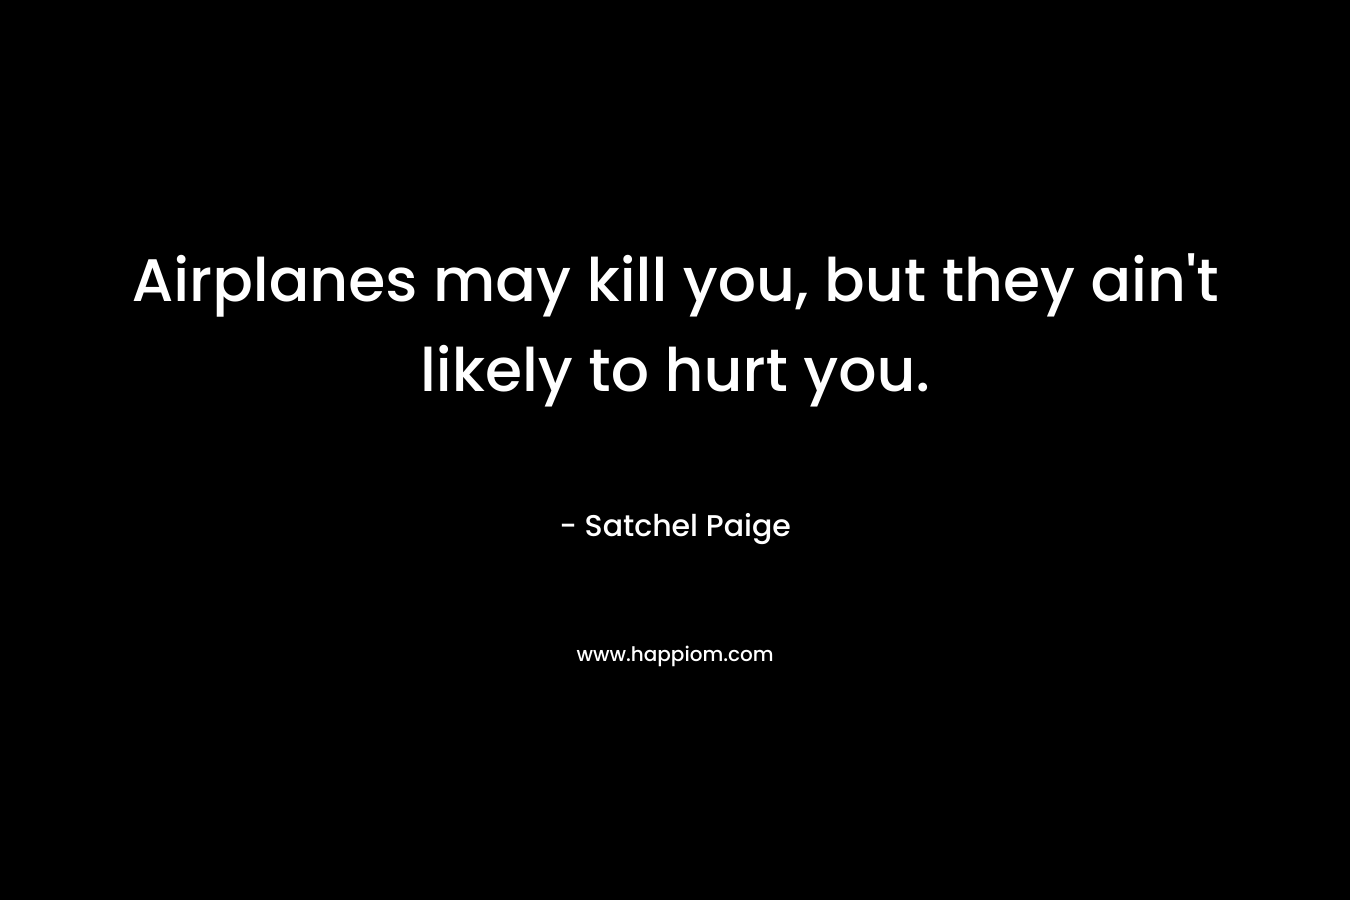 Airplanes may kill you, but they ain't likely to hurt you.